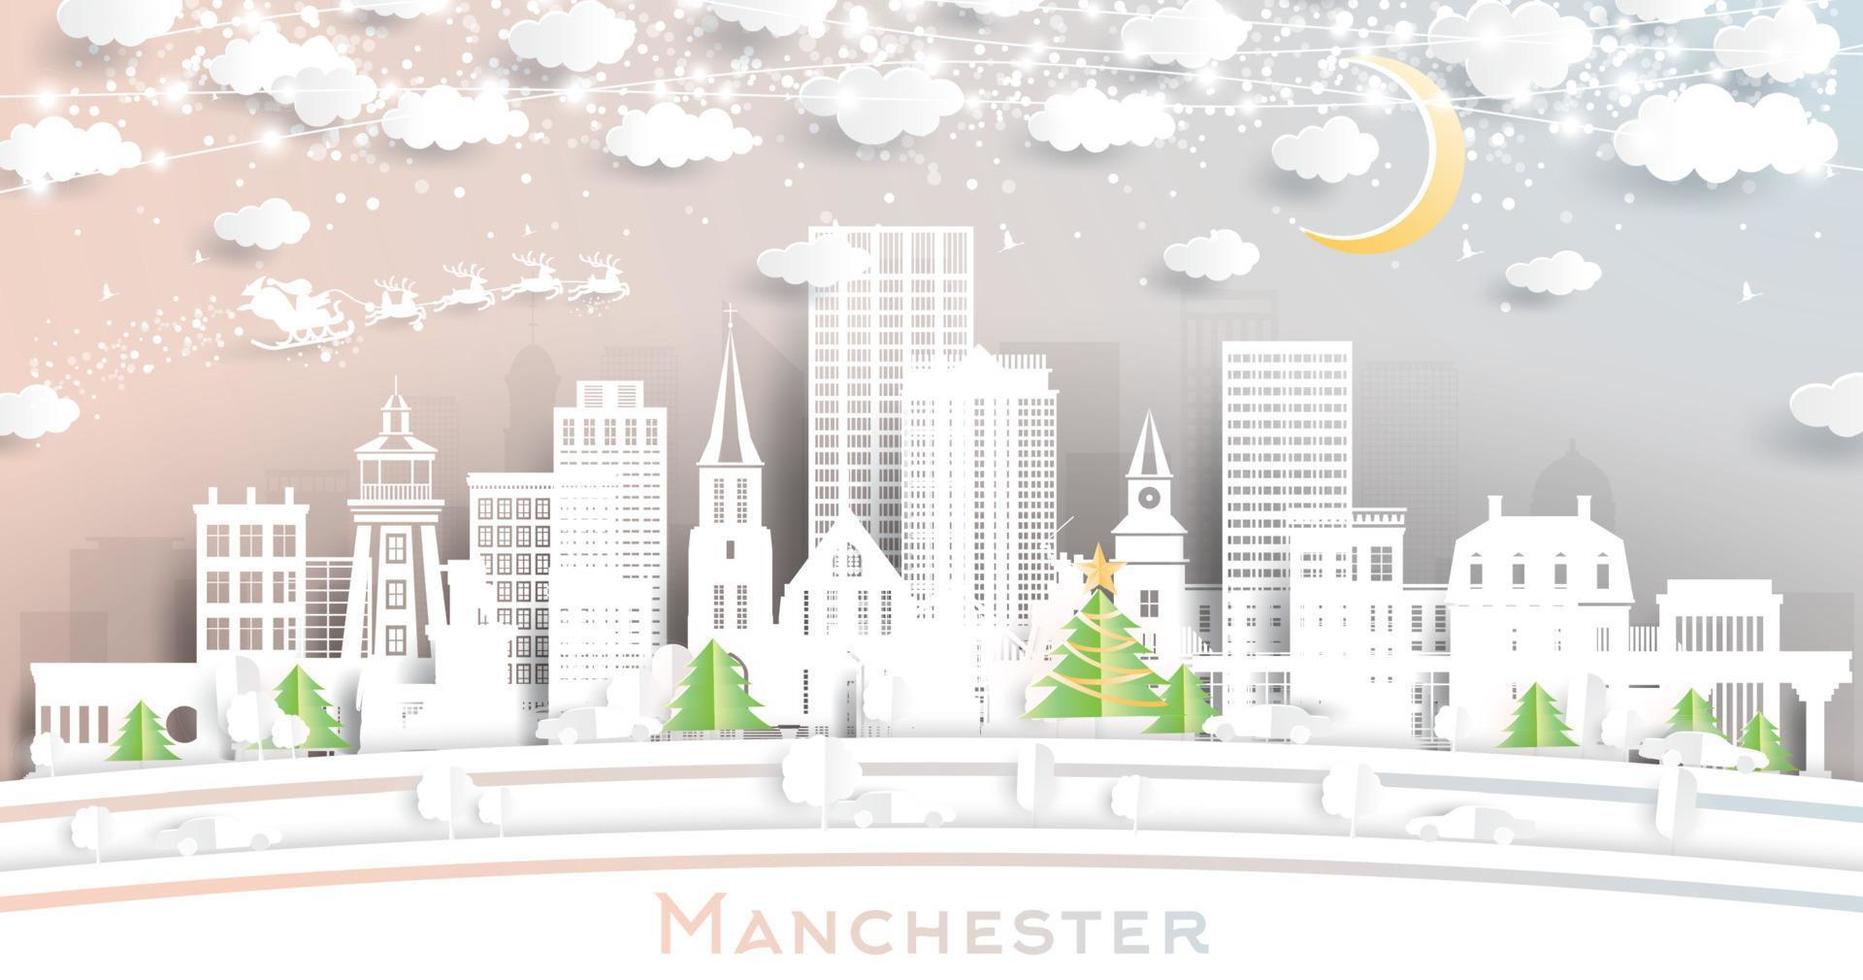 Manchester New Hampshire. Winter City Skyline in Paper Cut Style with Snowflakes, Moon and Neon Garland. vector